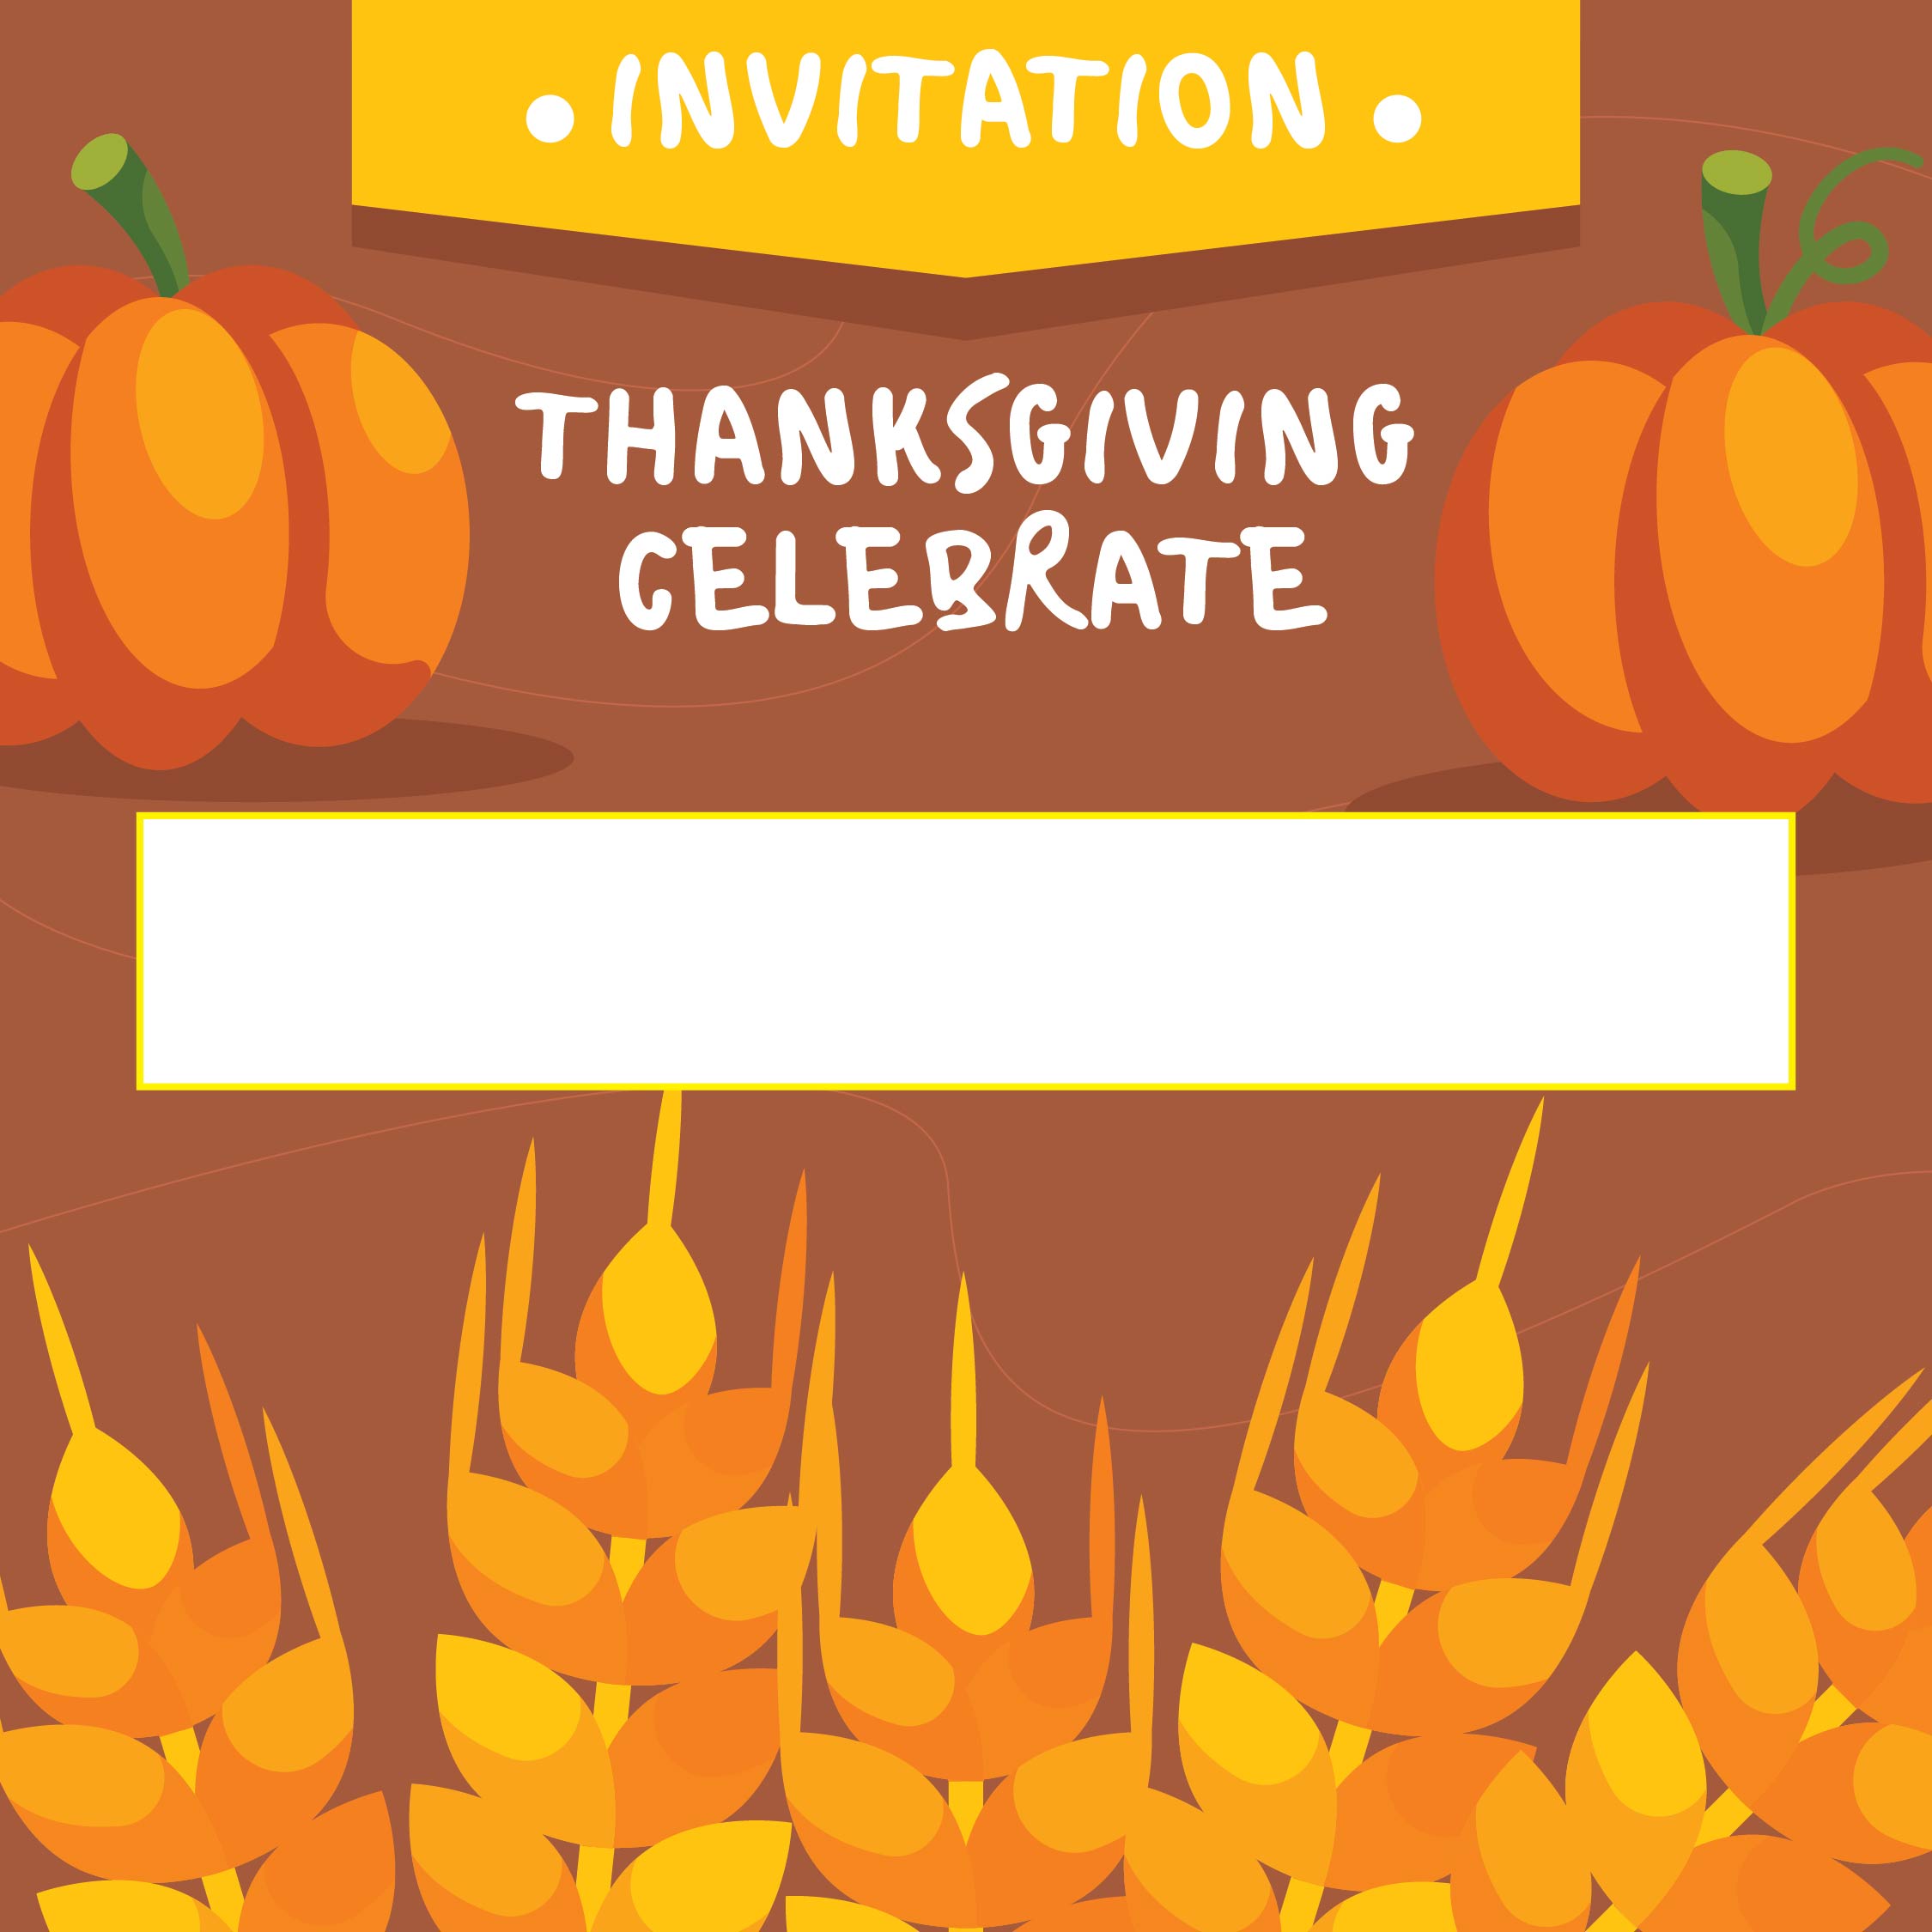 Thanksgiving Party Invitation Templates